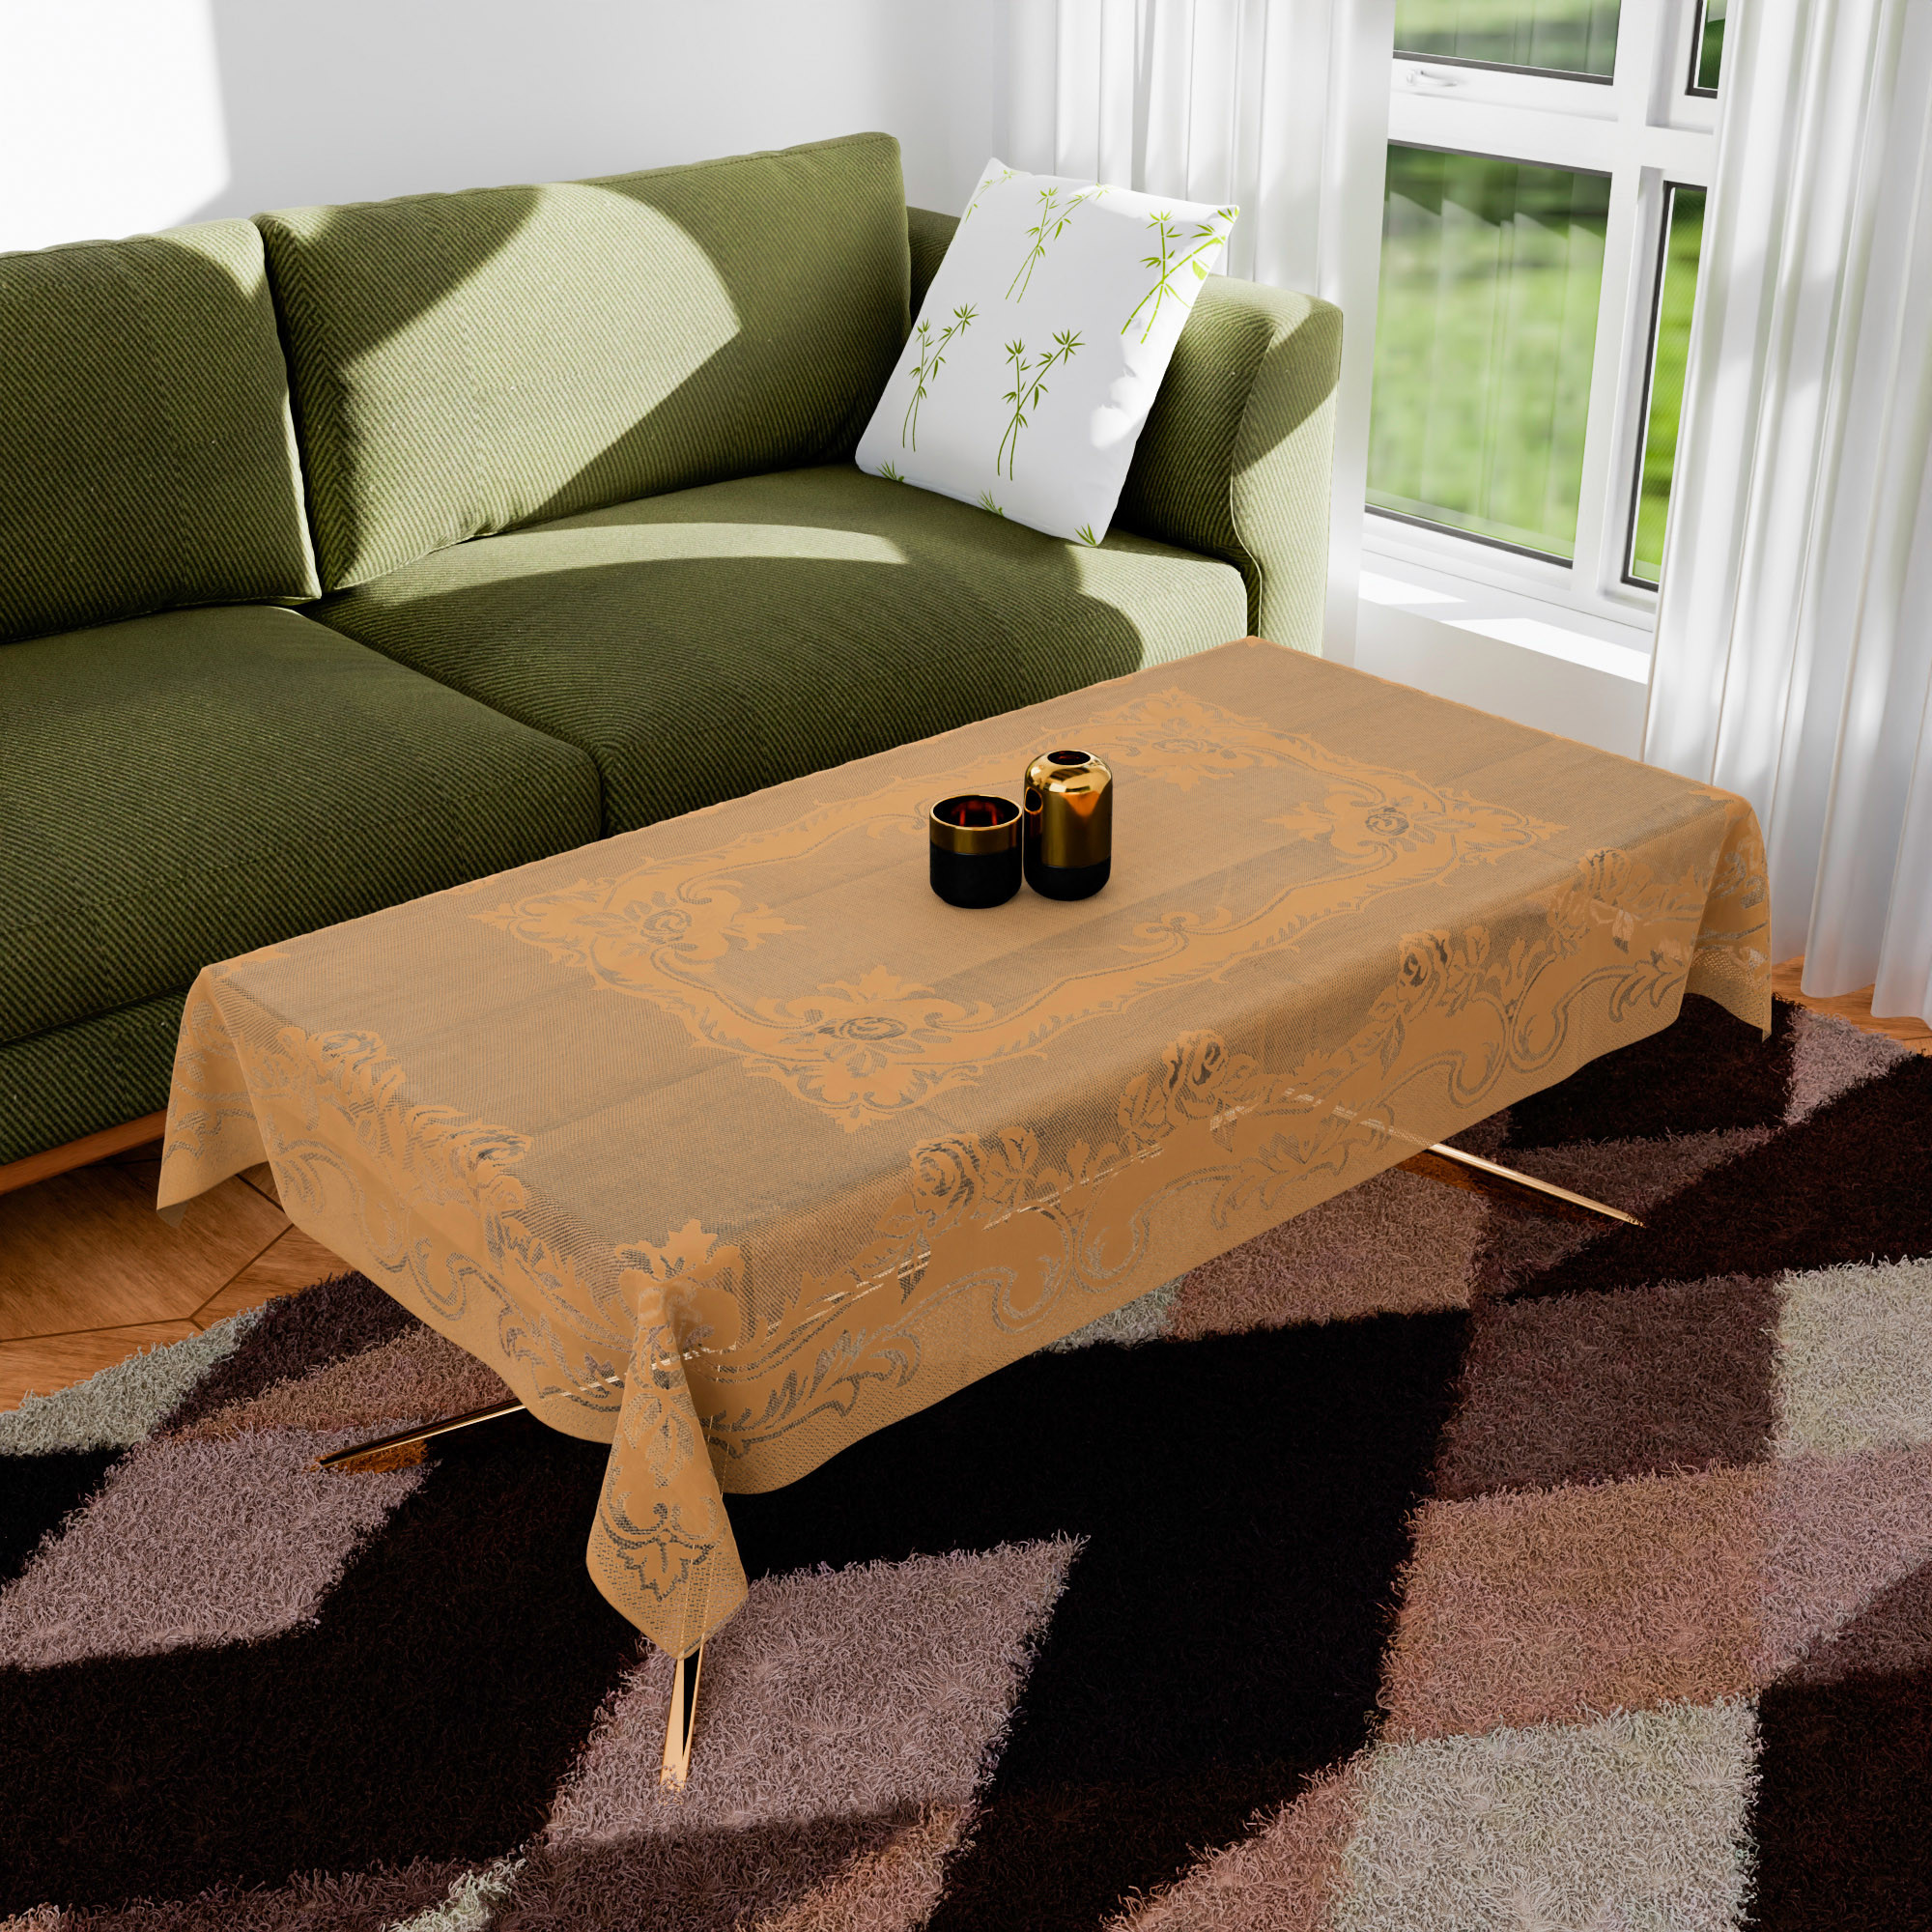 Kuber Industries Center Table Cover | Cotton Table Cloth Cover | 4-Seater Table Cloth | Self Gulmohar Vila Table Cover | Table Protector | Table Cover for Center Table | 40x60 Inch | Brown